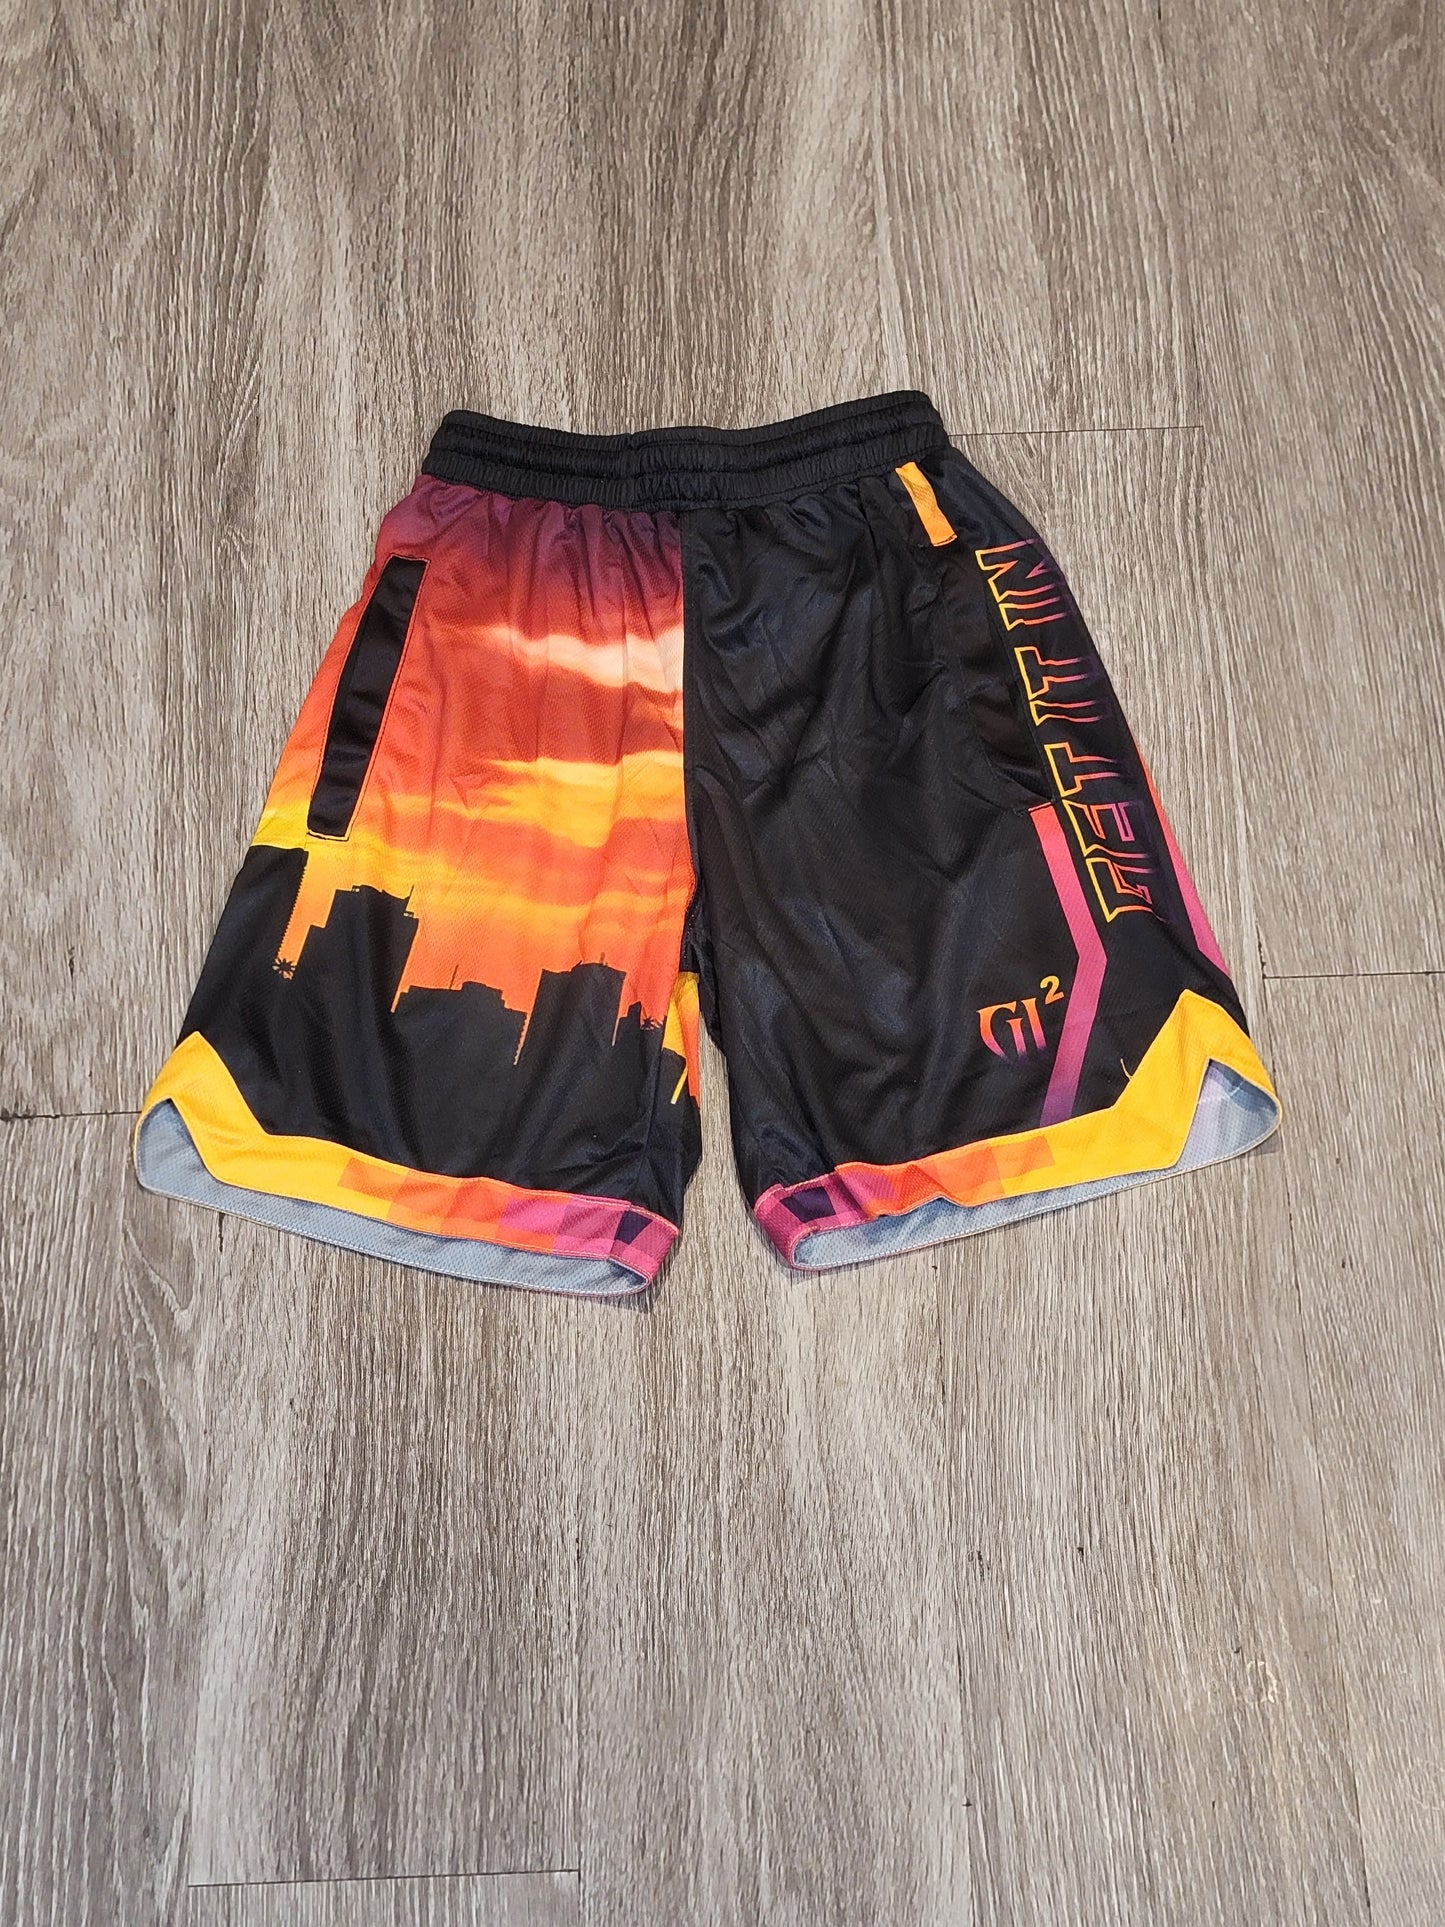 Valley edition 2.0 shorts